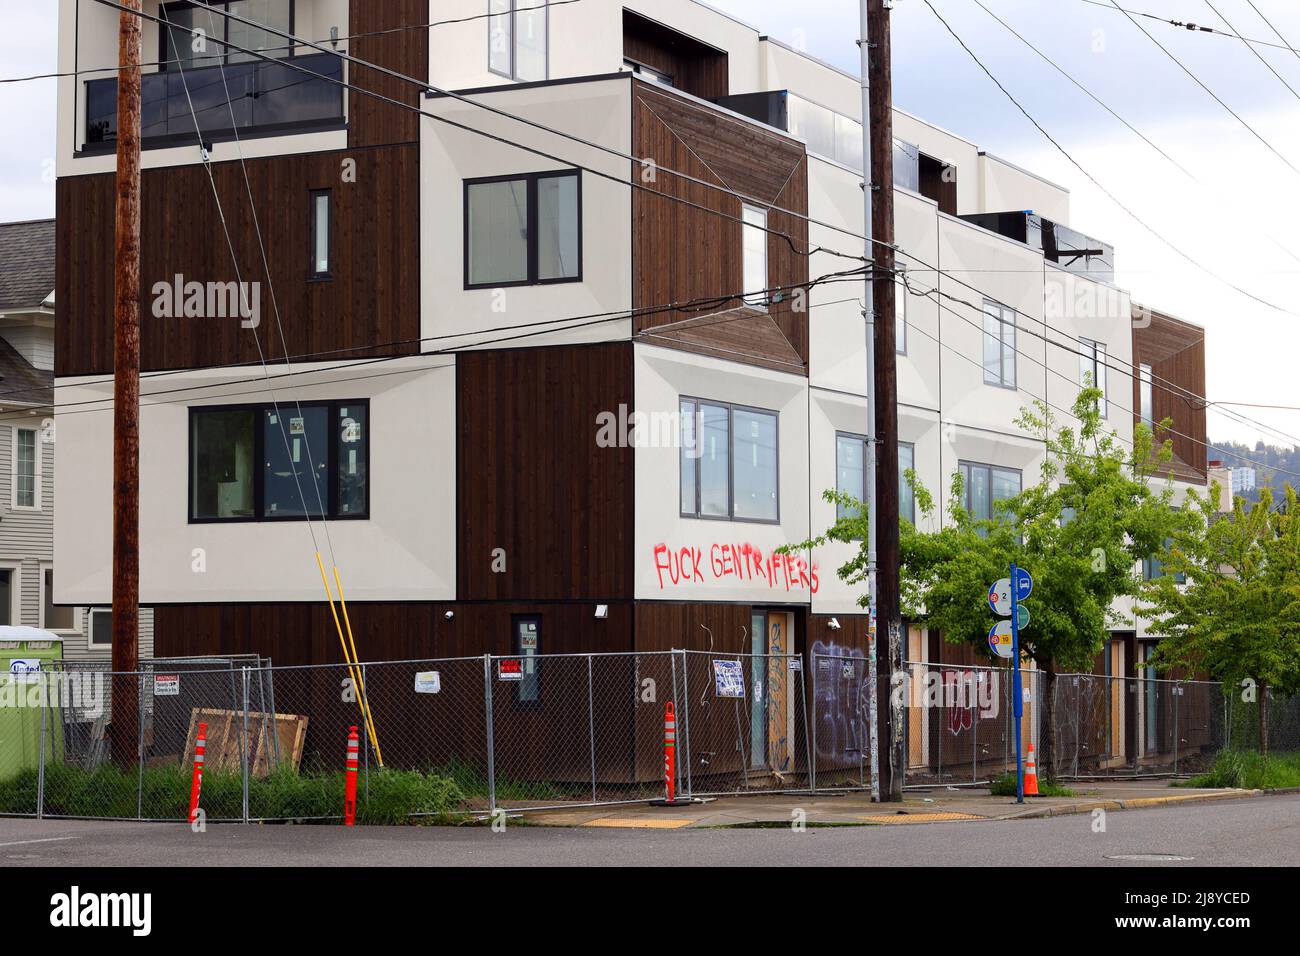 New Construction Townhouses with 'Fuck Gentrifiers' Graffiti in the Division/Clinton, Hosford-Abernethy Neighborhood, Portland, Oregon, April 26, 2022 Stockfoto